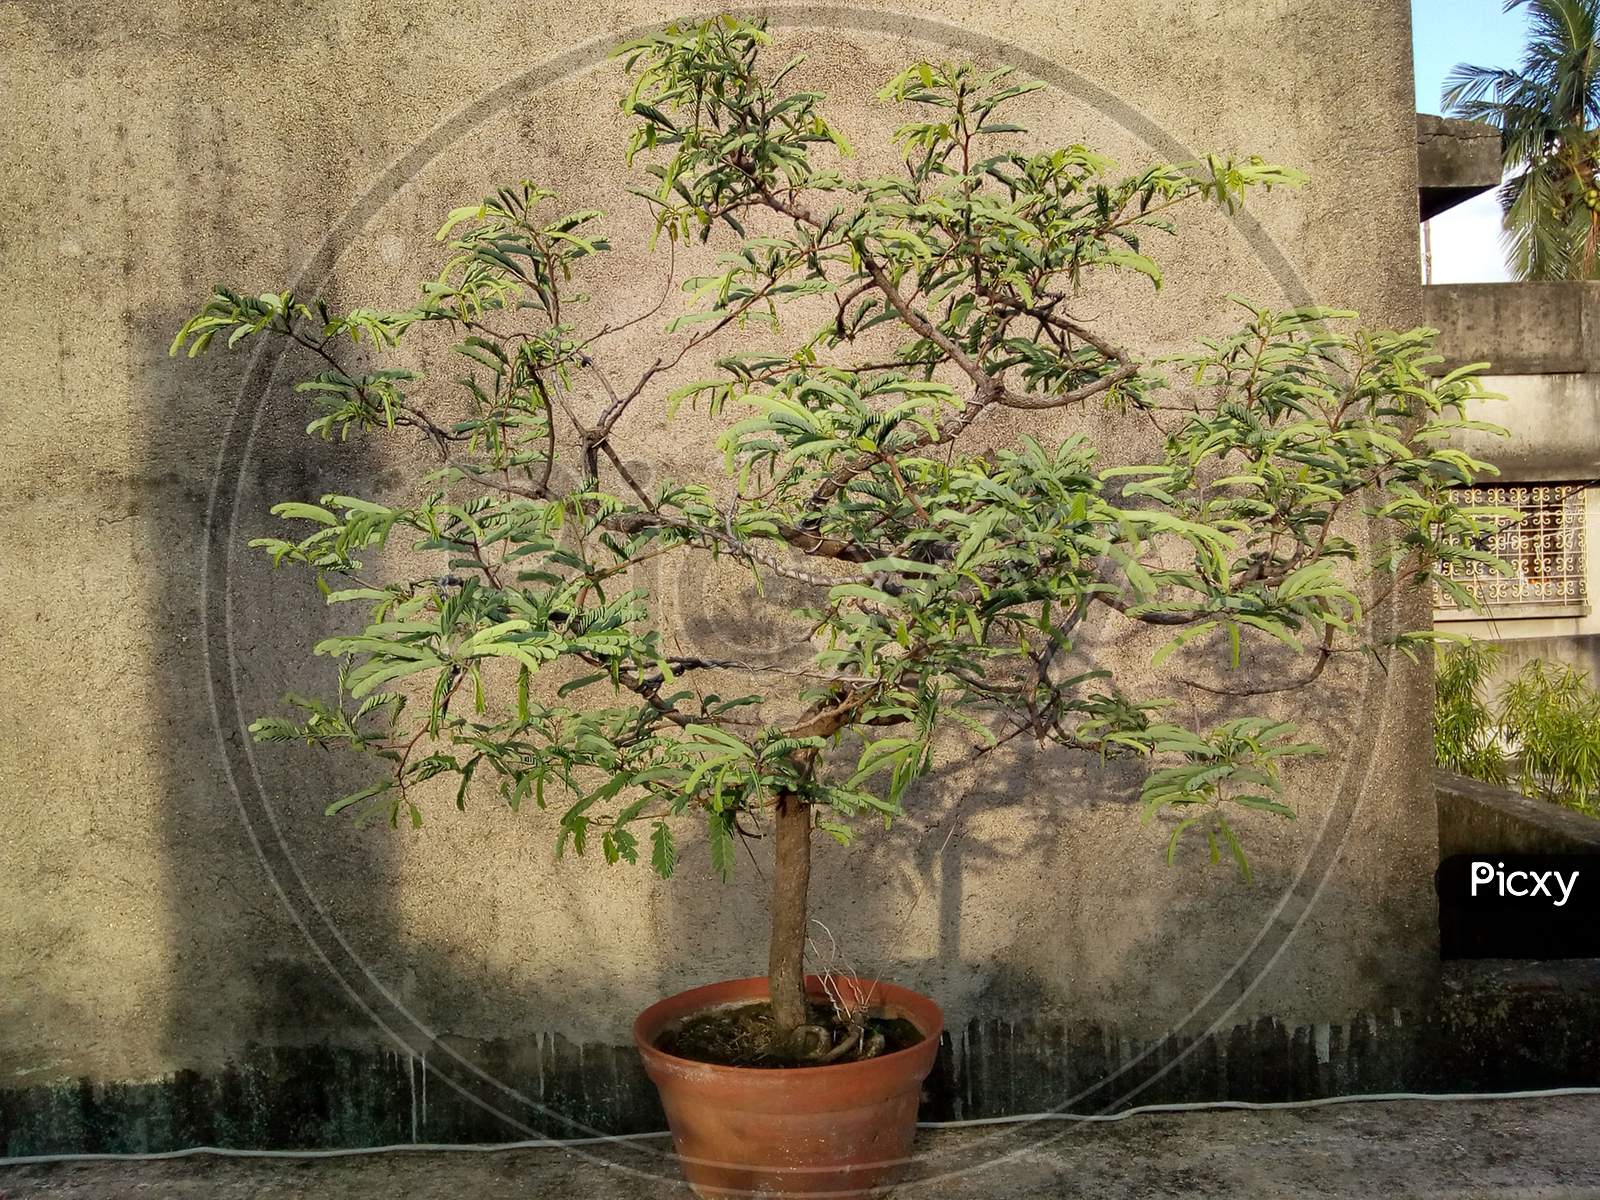 Bonsai Is An East Asian Art Form Which Utilizes Cultivation Techniques To Produce, In Containers, Small Trees That Mimic The Shape And Scale Of Full Size Trees